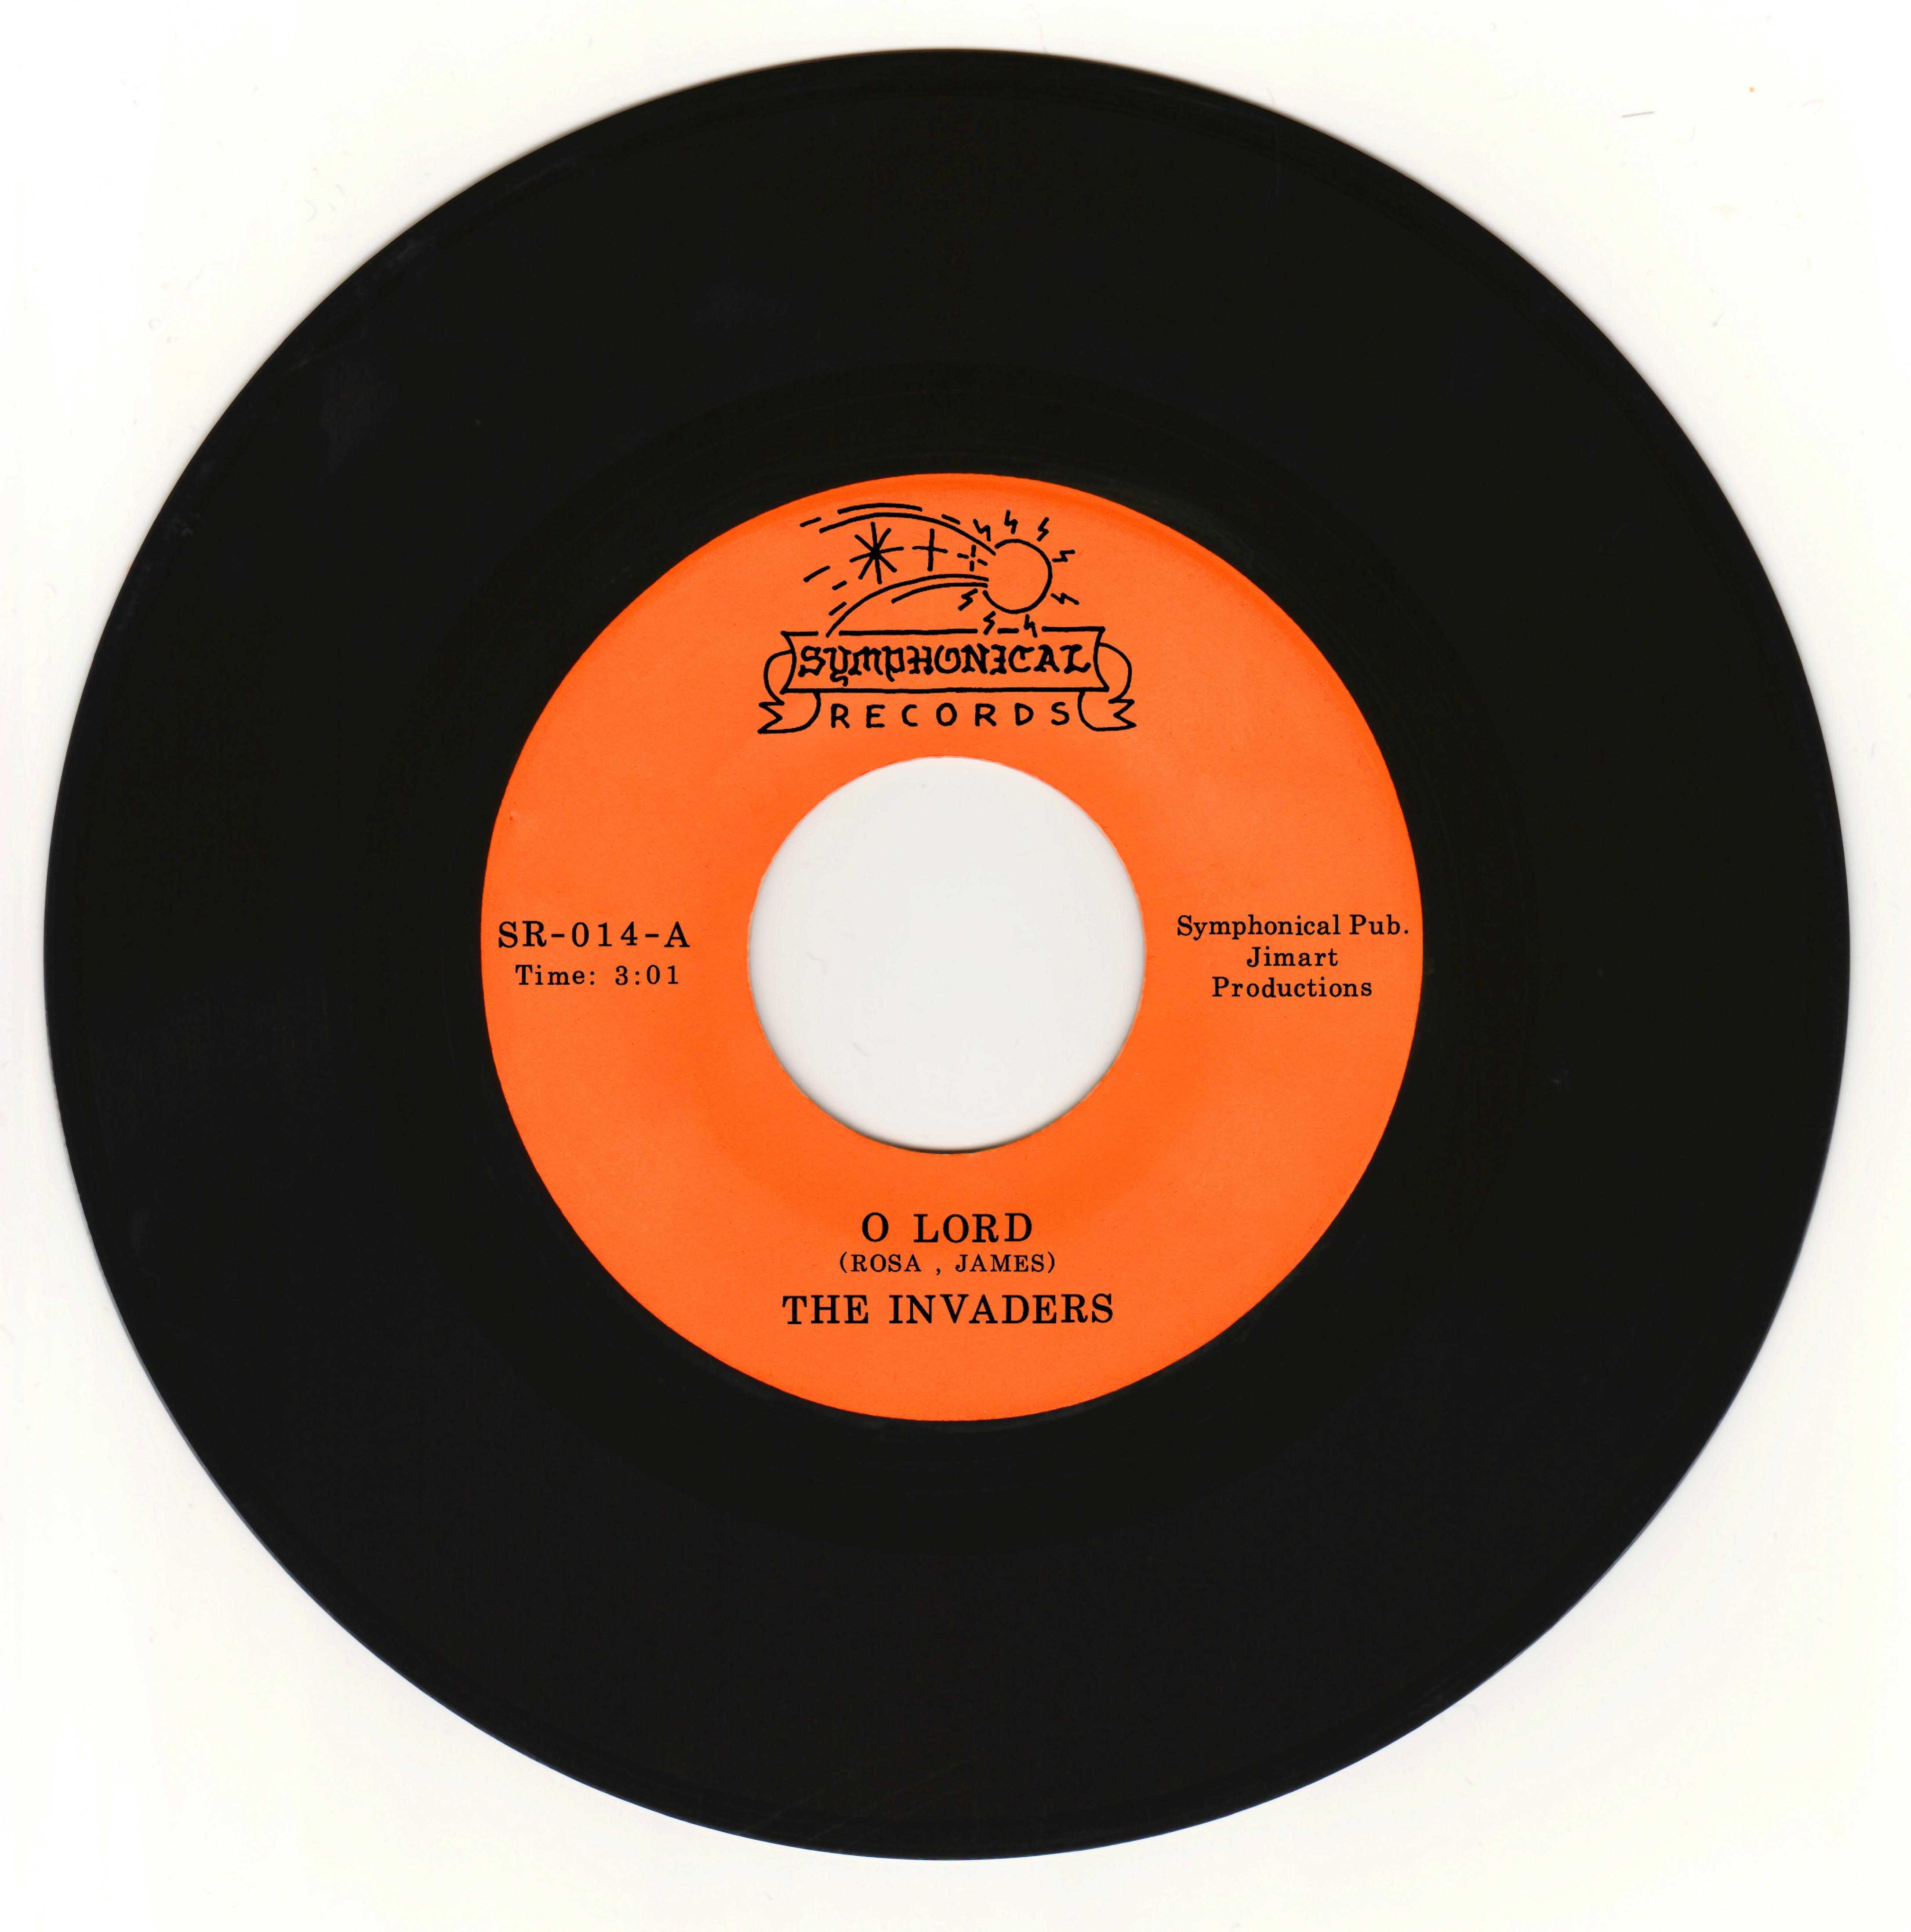 Invaders/O LORD & WILDROOTE 7"